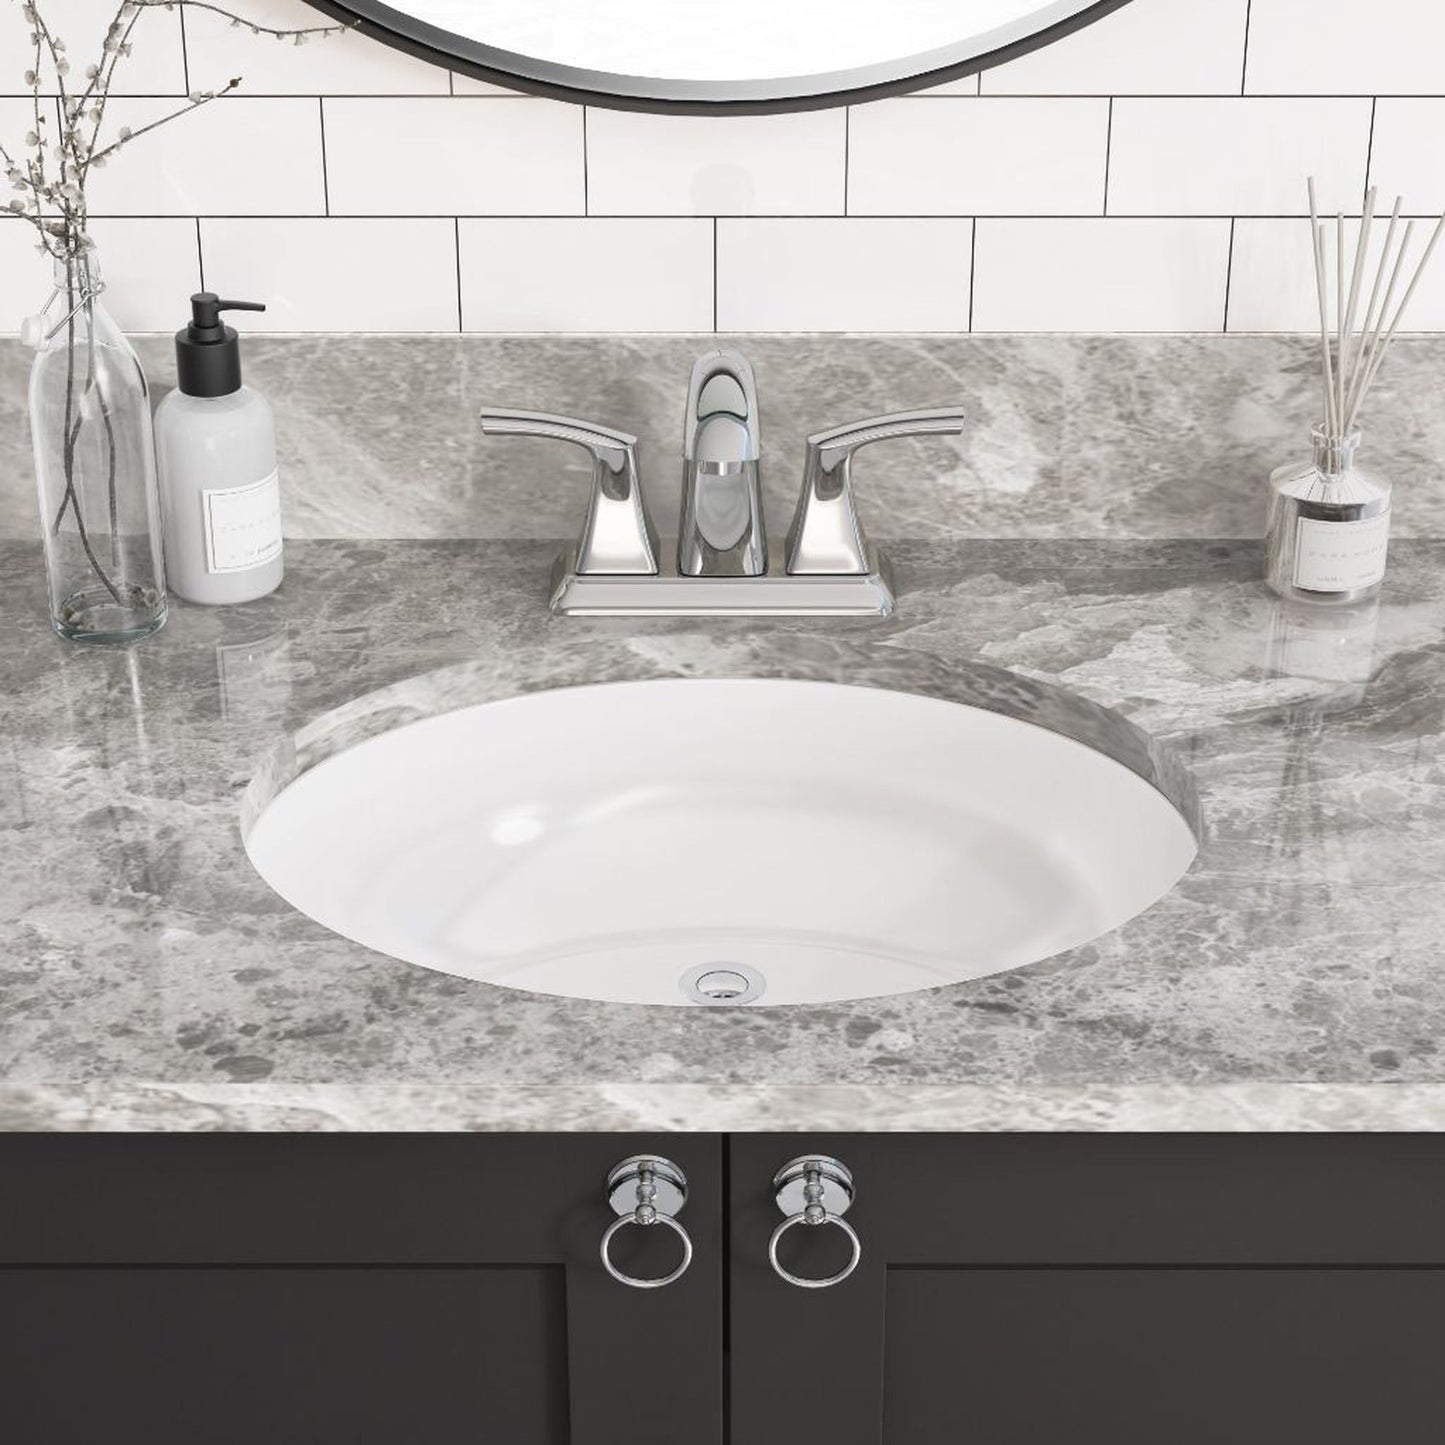 Allora USA 17.375" X 14.375" Vitreous China White Oval Porcelain Undermount Sink With Overflow